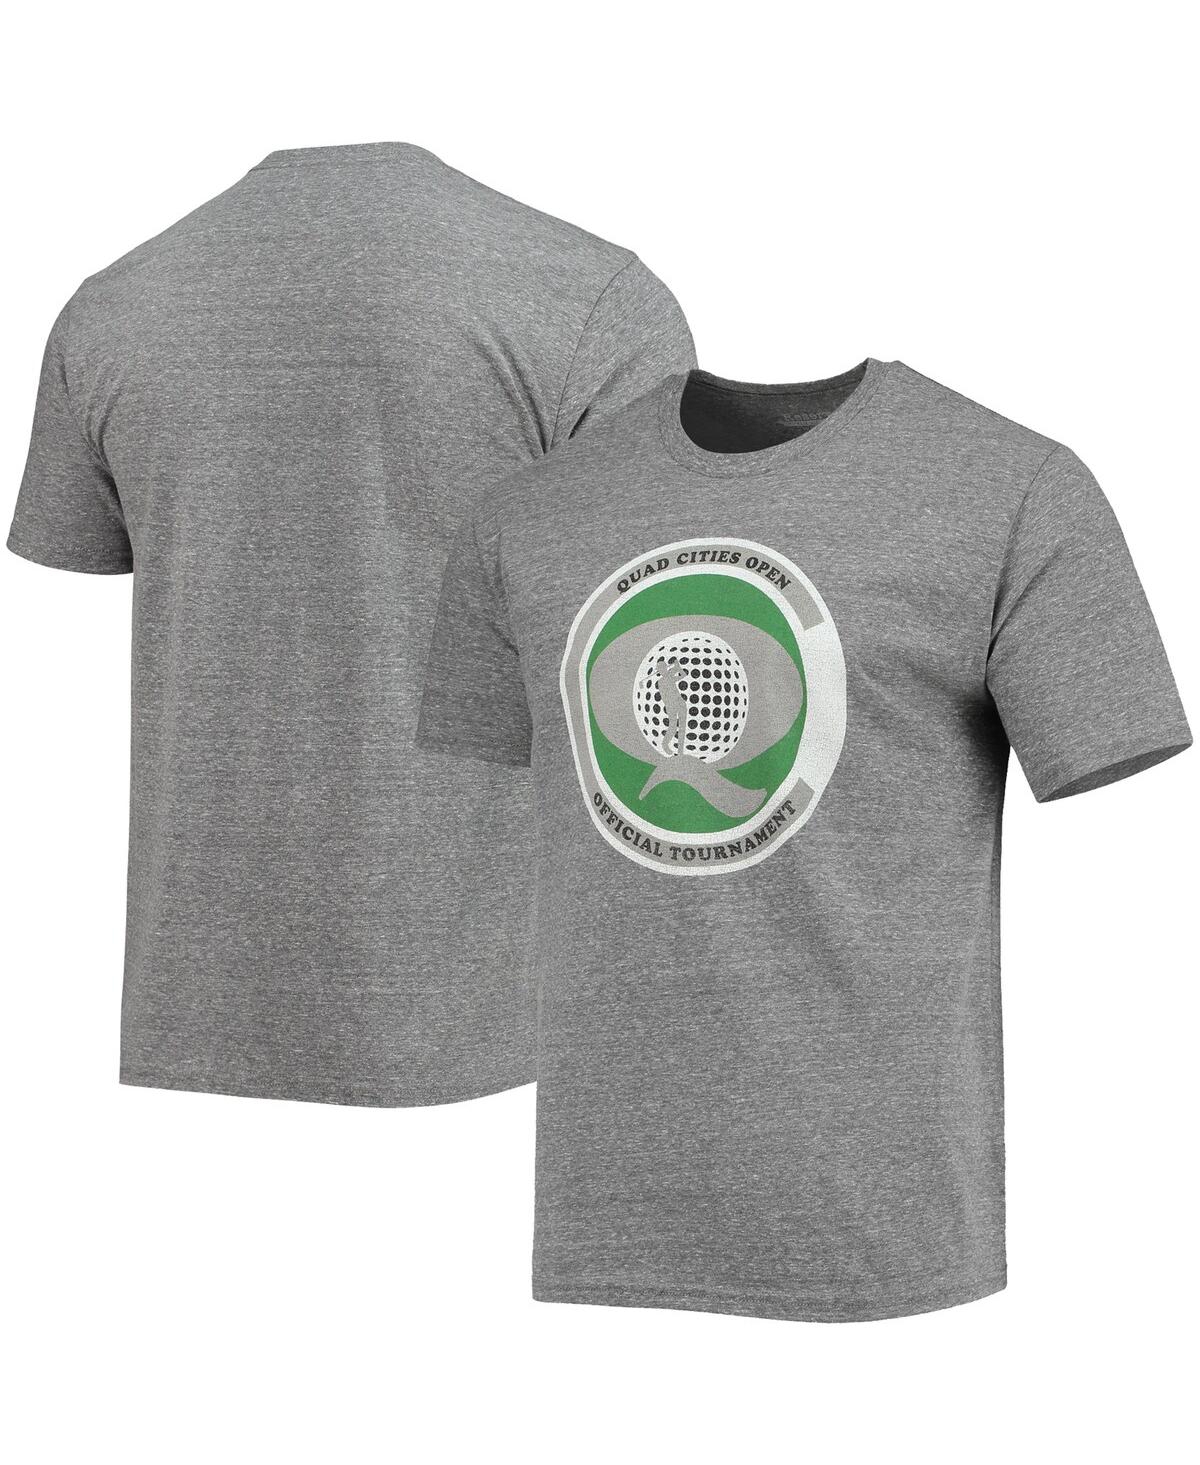 BLUE 84 MEN'S BLUE 84 HEATHERED GRAY JOHN DEERE CLASSIC HERITAGE COLLECTION QUAD CITIES OPEN TRI-BLEND T-SHI